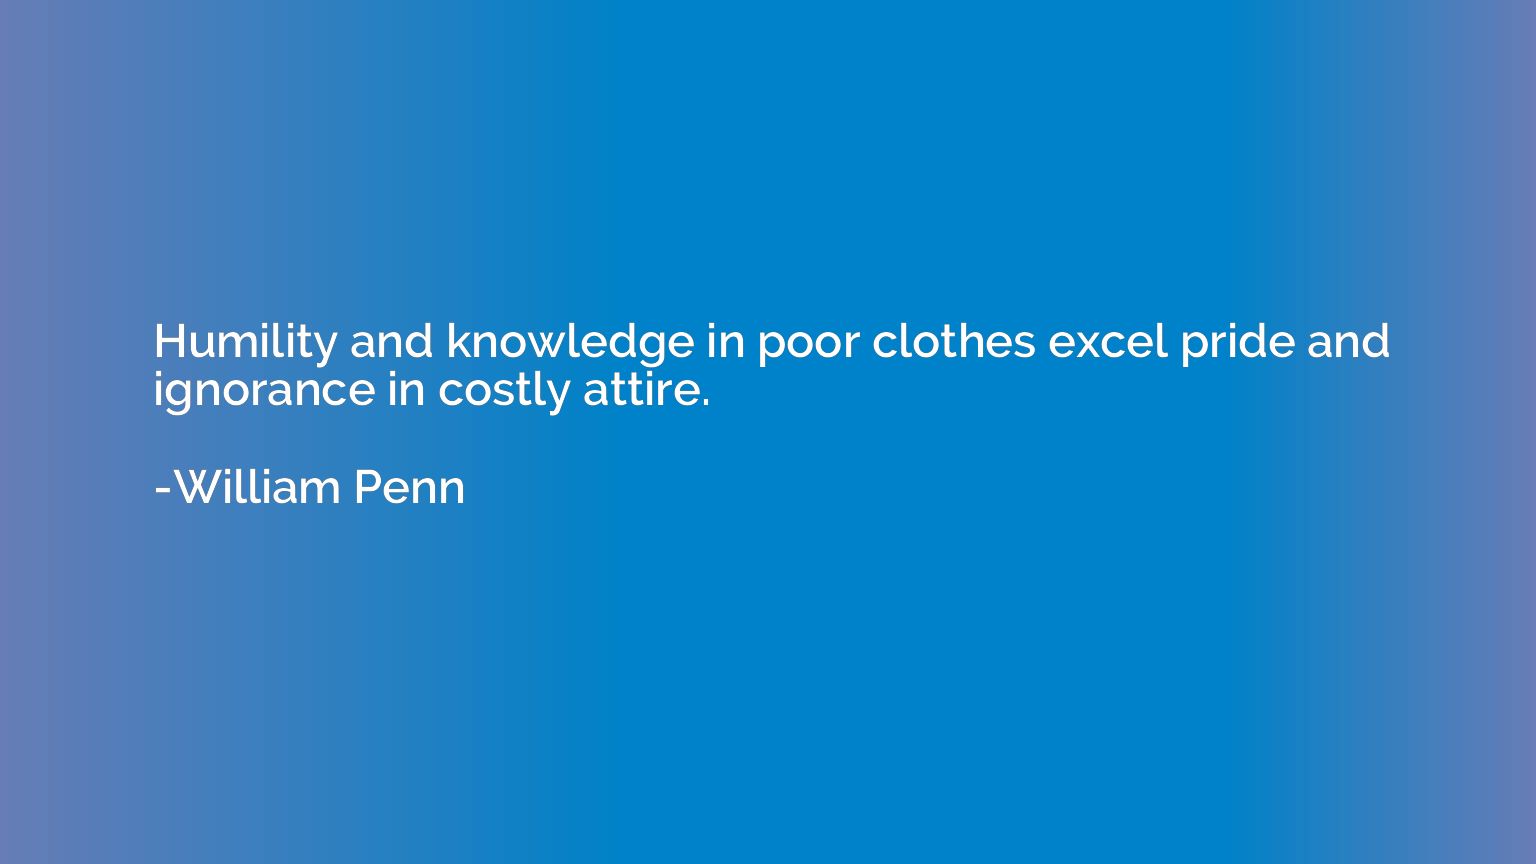 Humility and knowledge in poor clothes excel pride and ignor